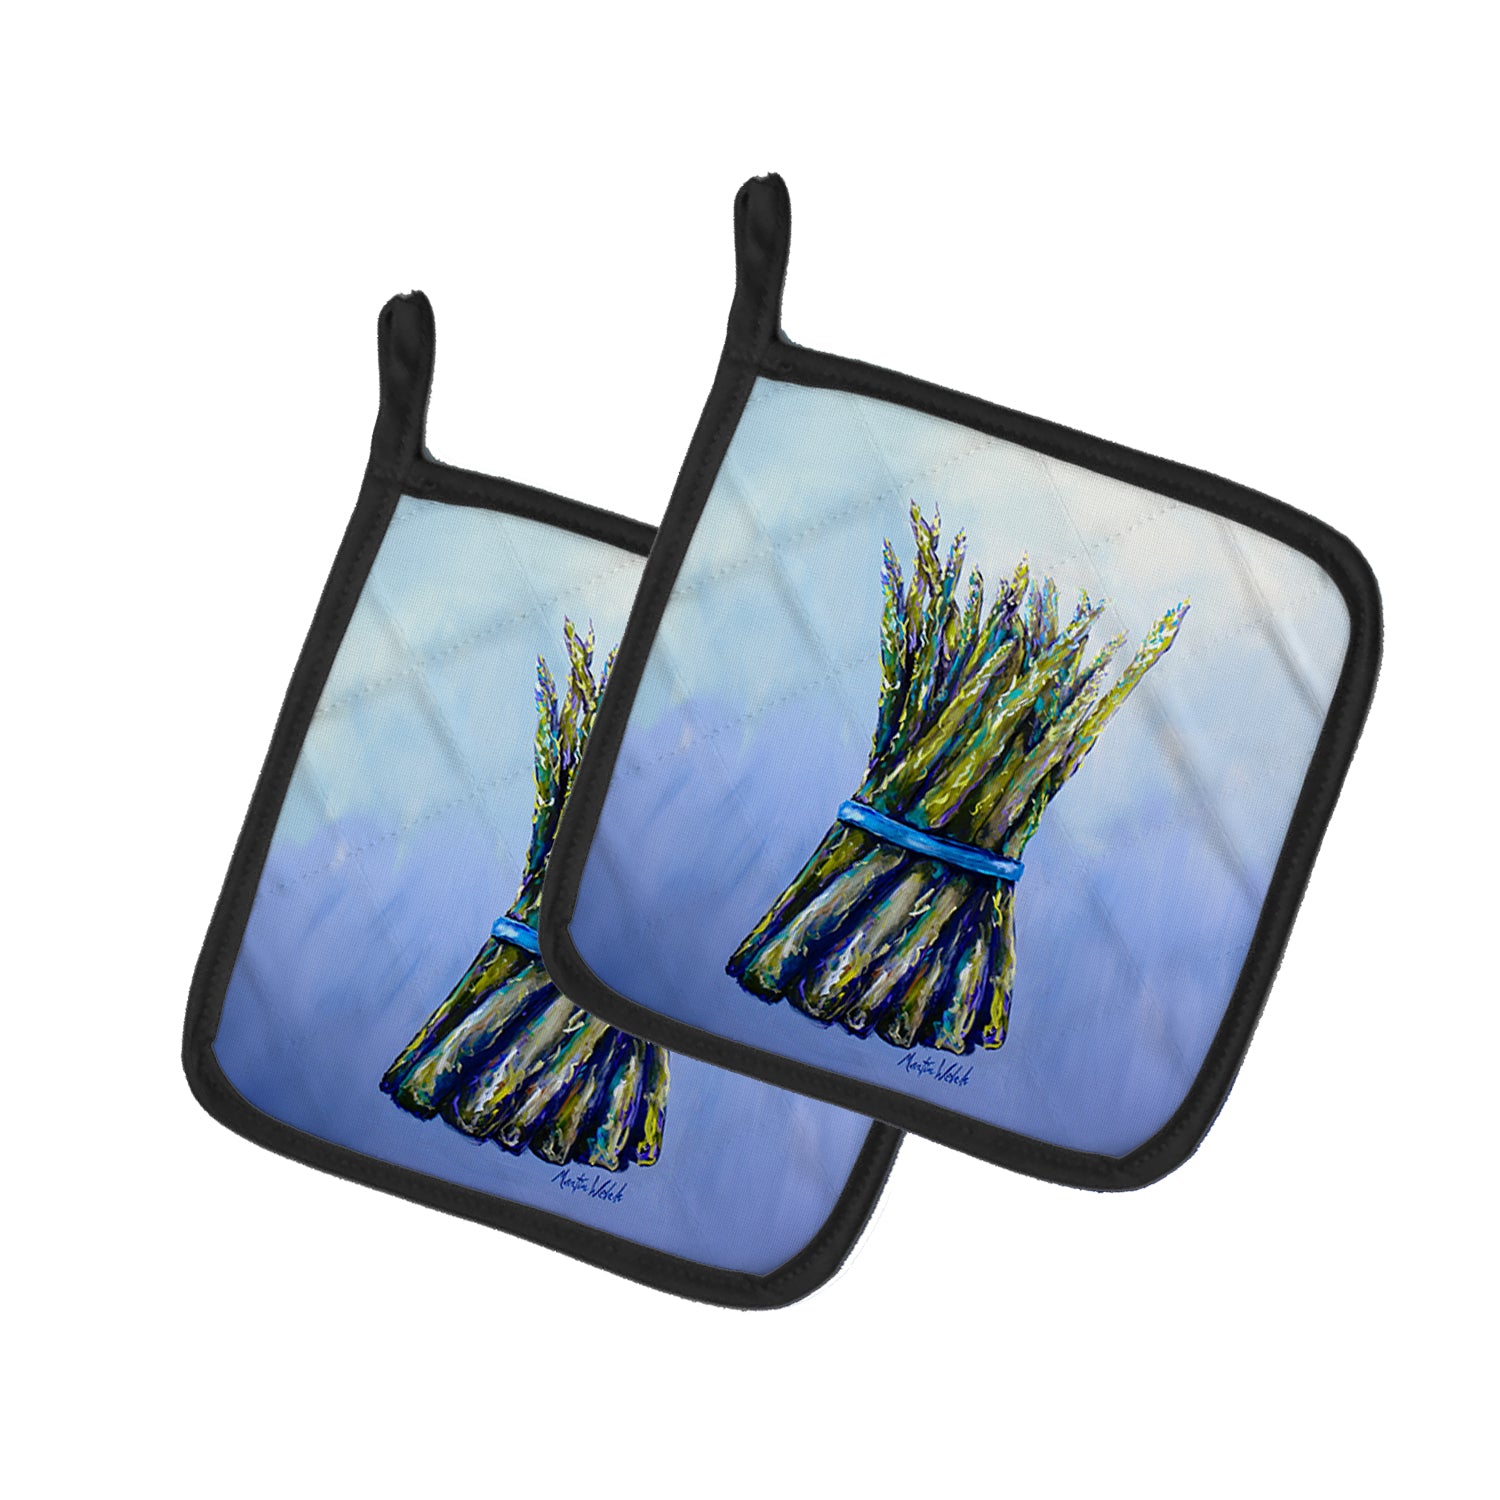 Buy this Fresh Bunch Asparagus Pair of Pot Holders